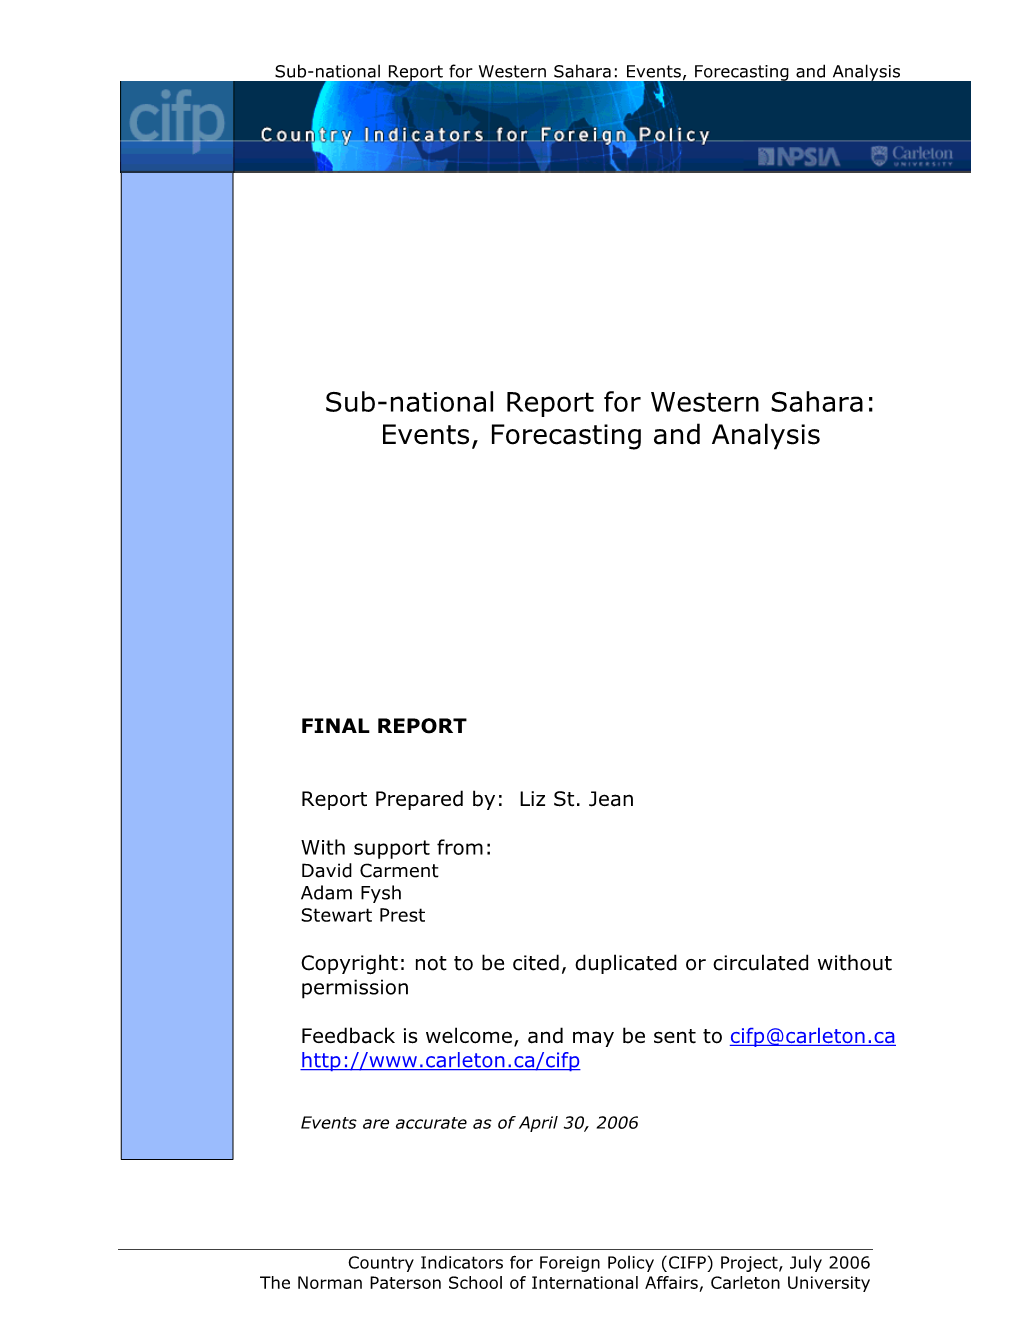 Sub-National Report for Western Sahara: Events, Forecasting and Analysis S